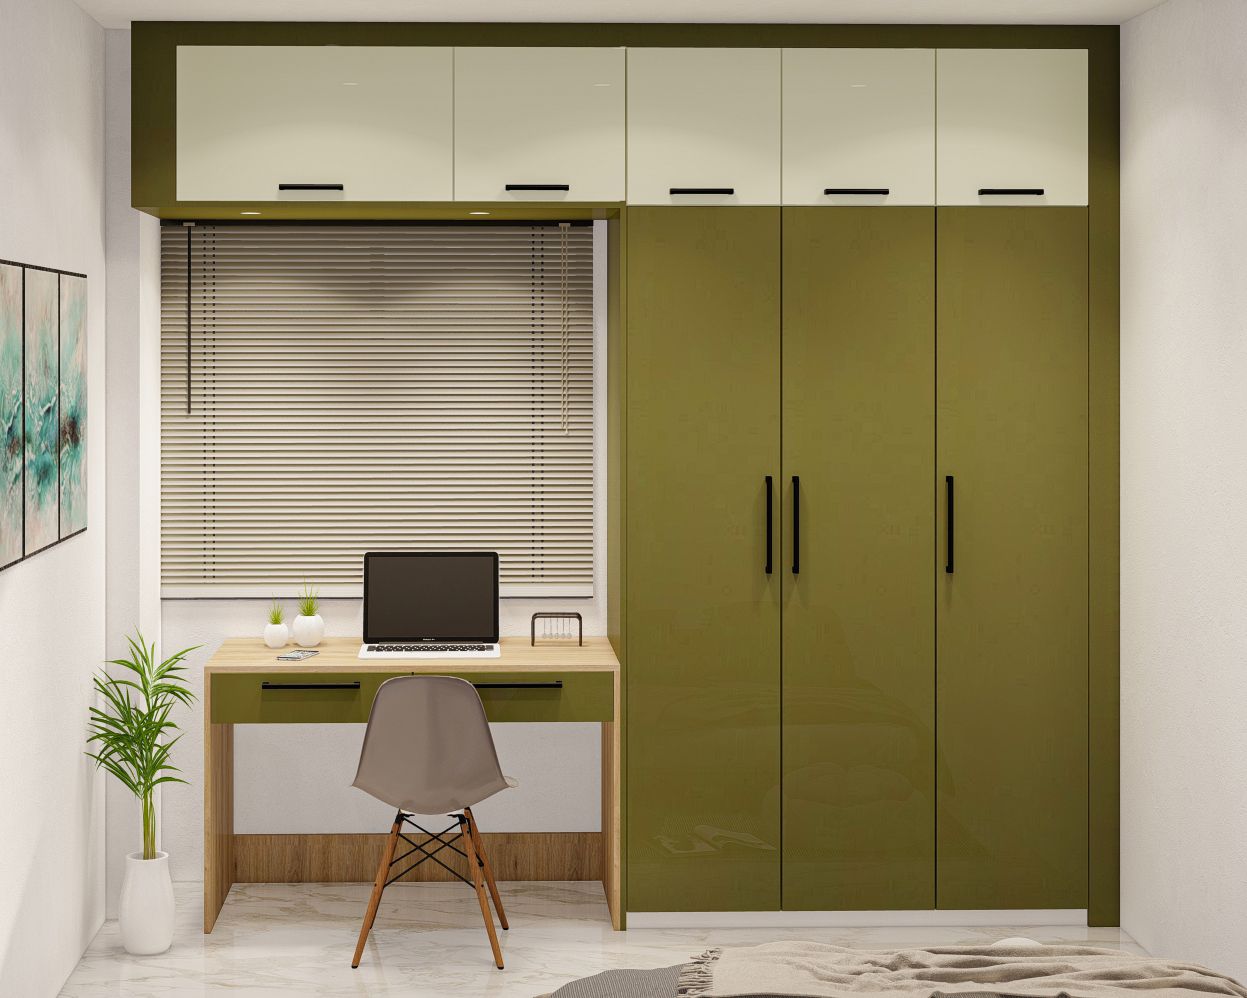 Multifunctional Contemporary Wardrobe Design With Maximum Space ...